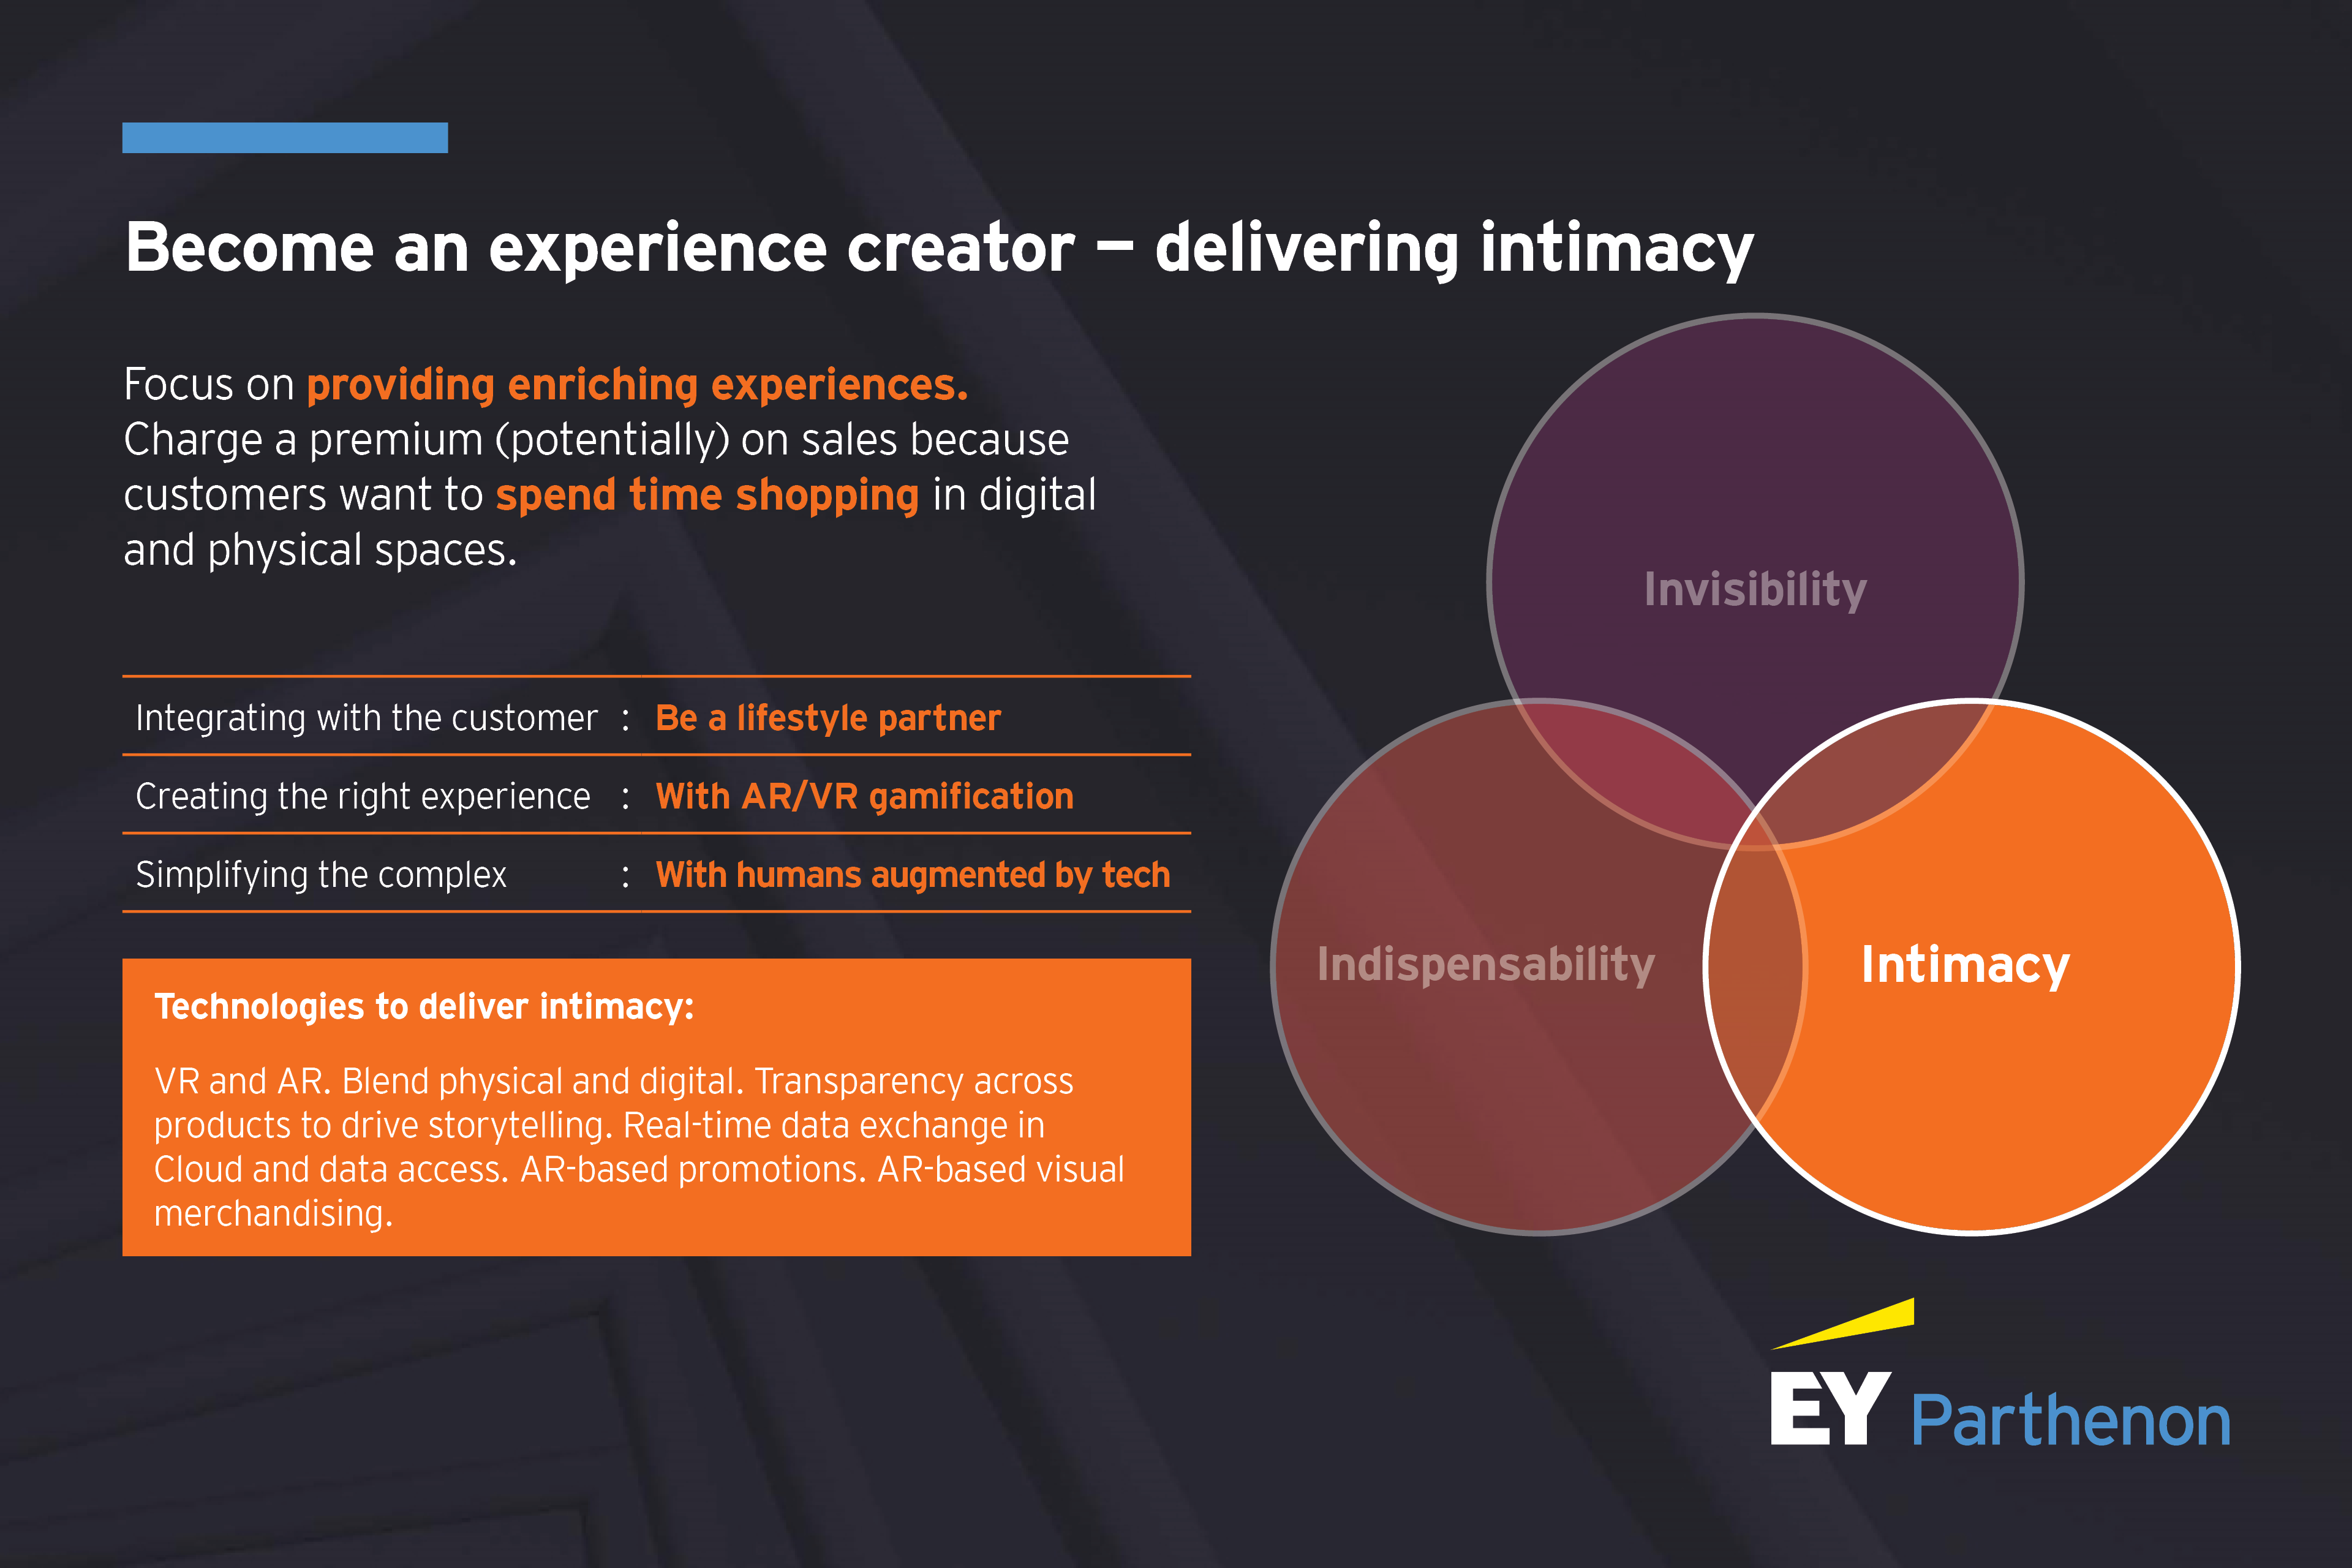 Become an experience creator: How retailers can deliver intimacy